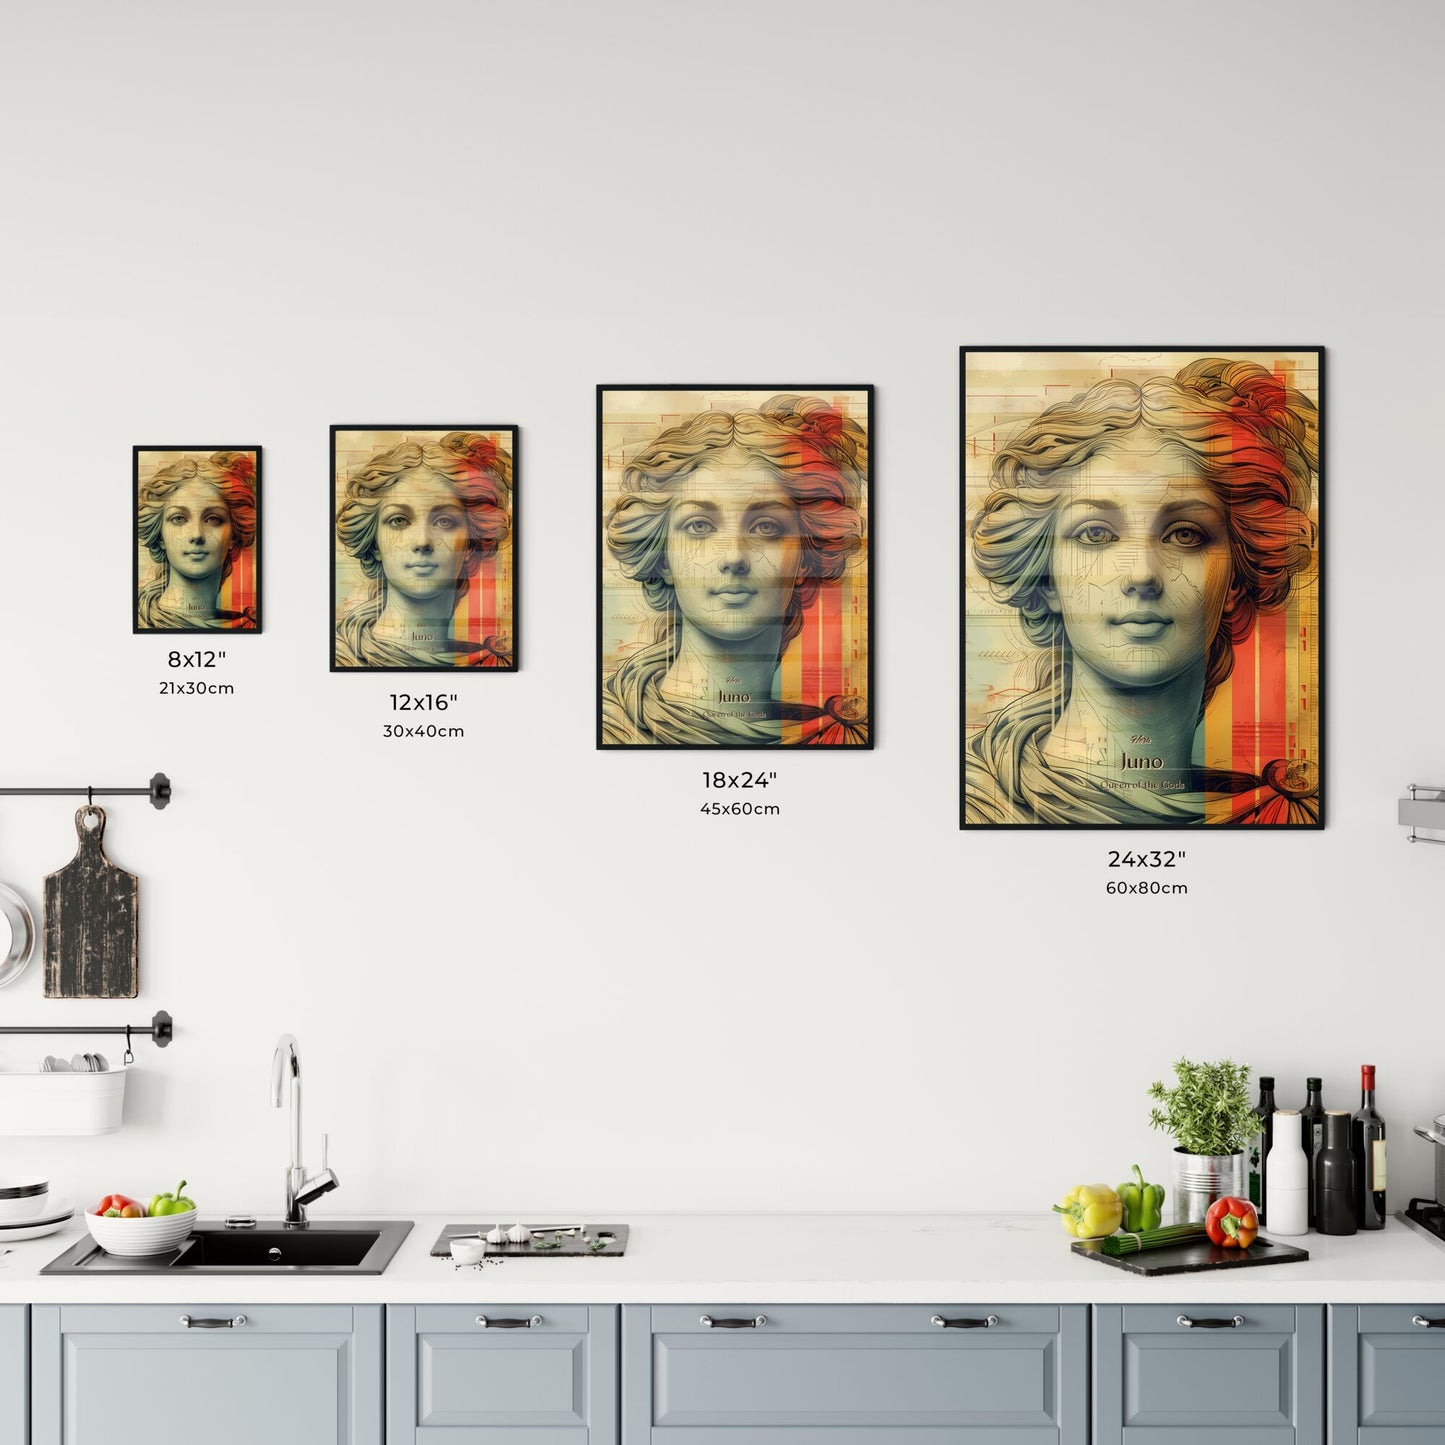 Hera, Juno, Queen of the Gods, A Poster of a woman_s face with a pattern Default Title